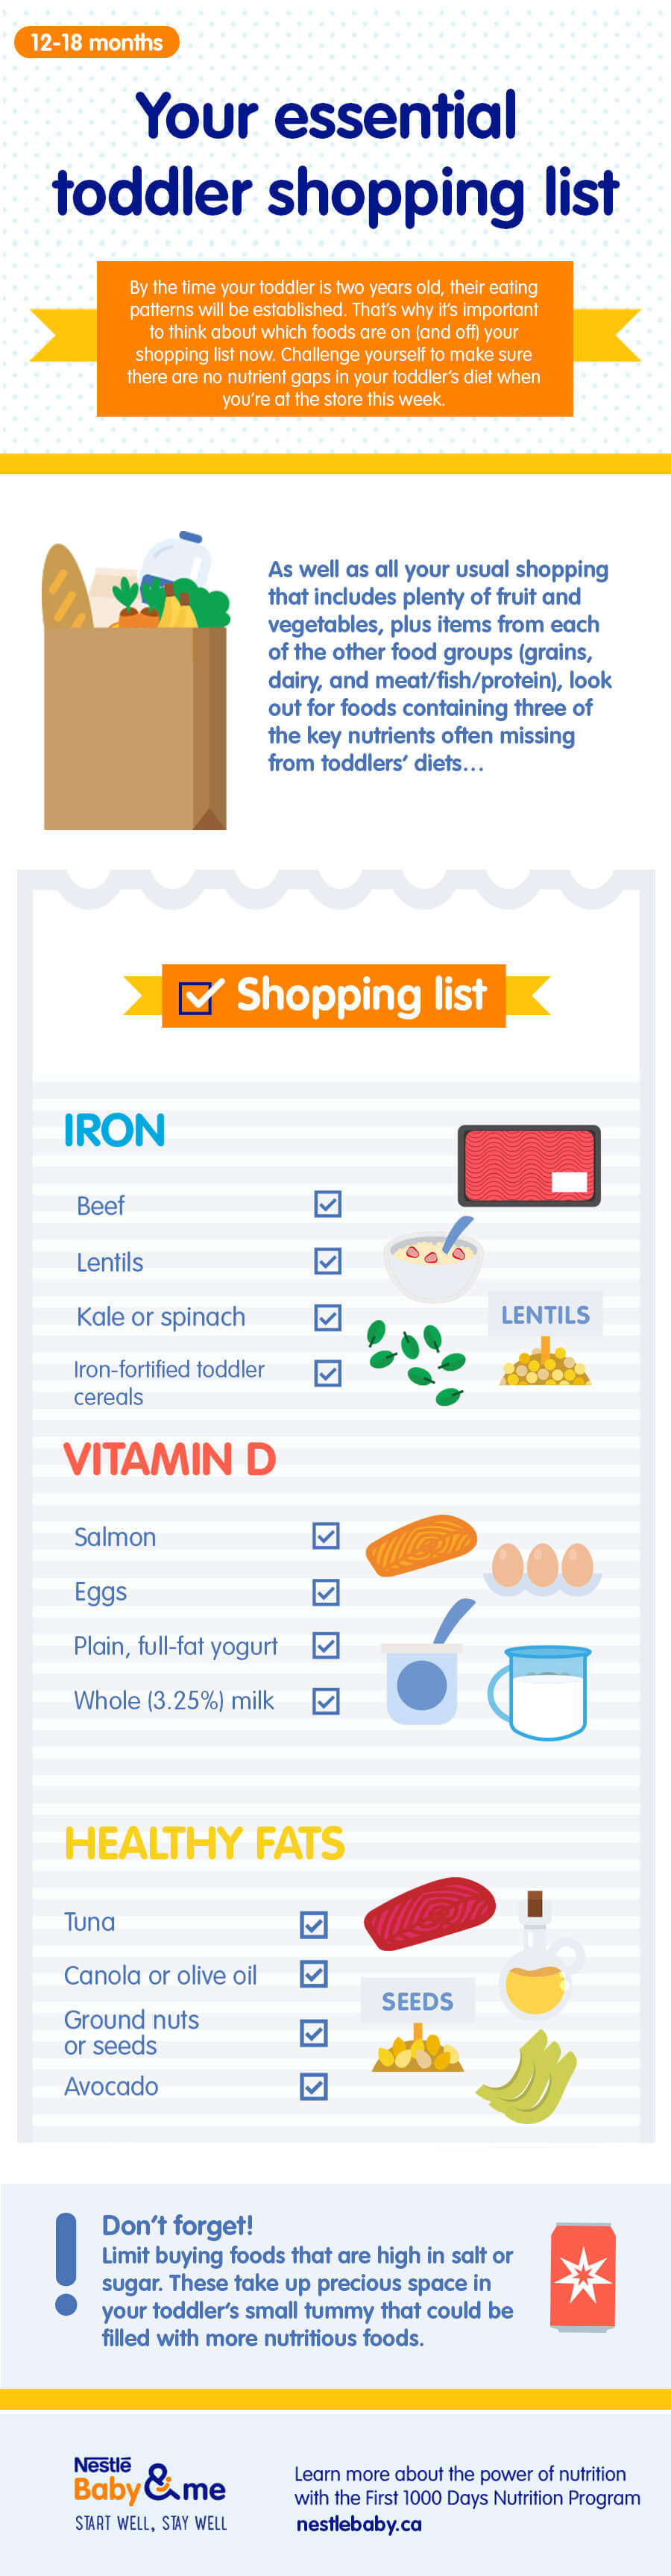 Your essential toddler shopping list